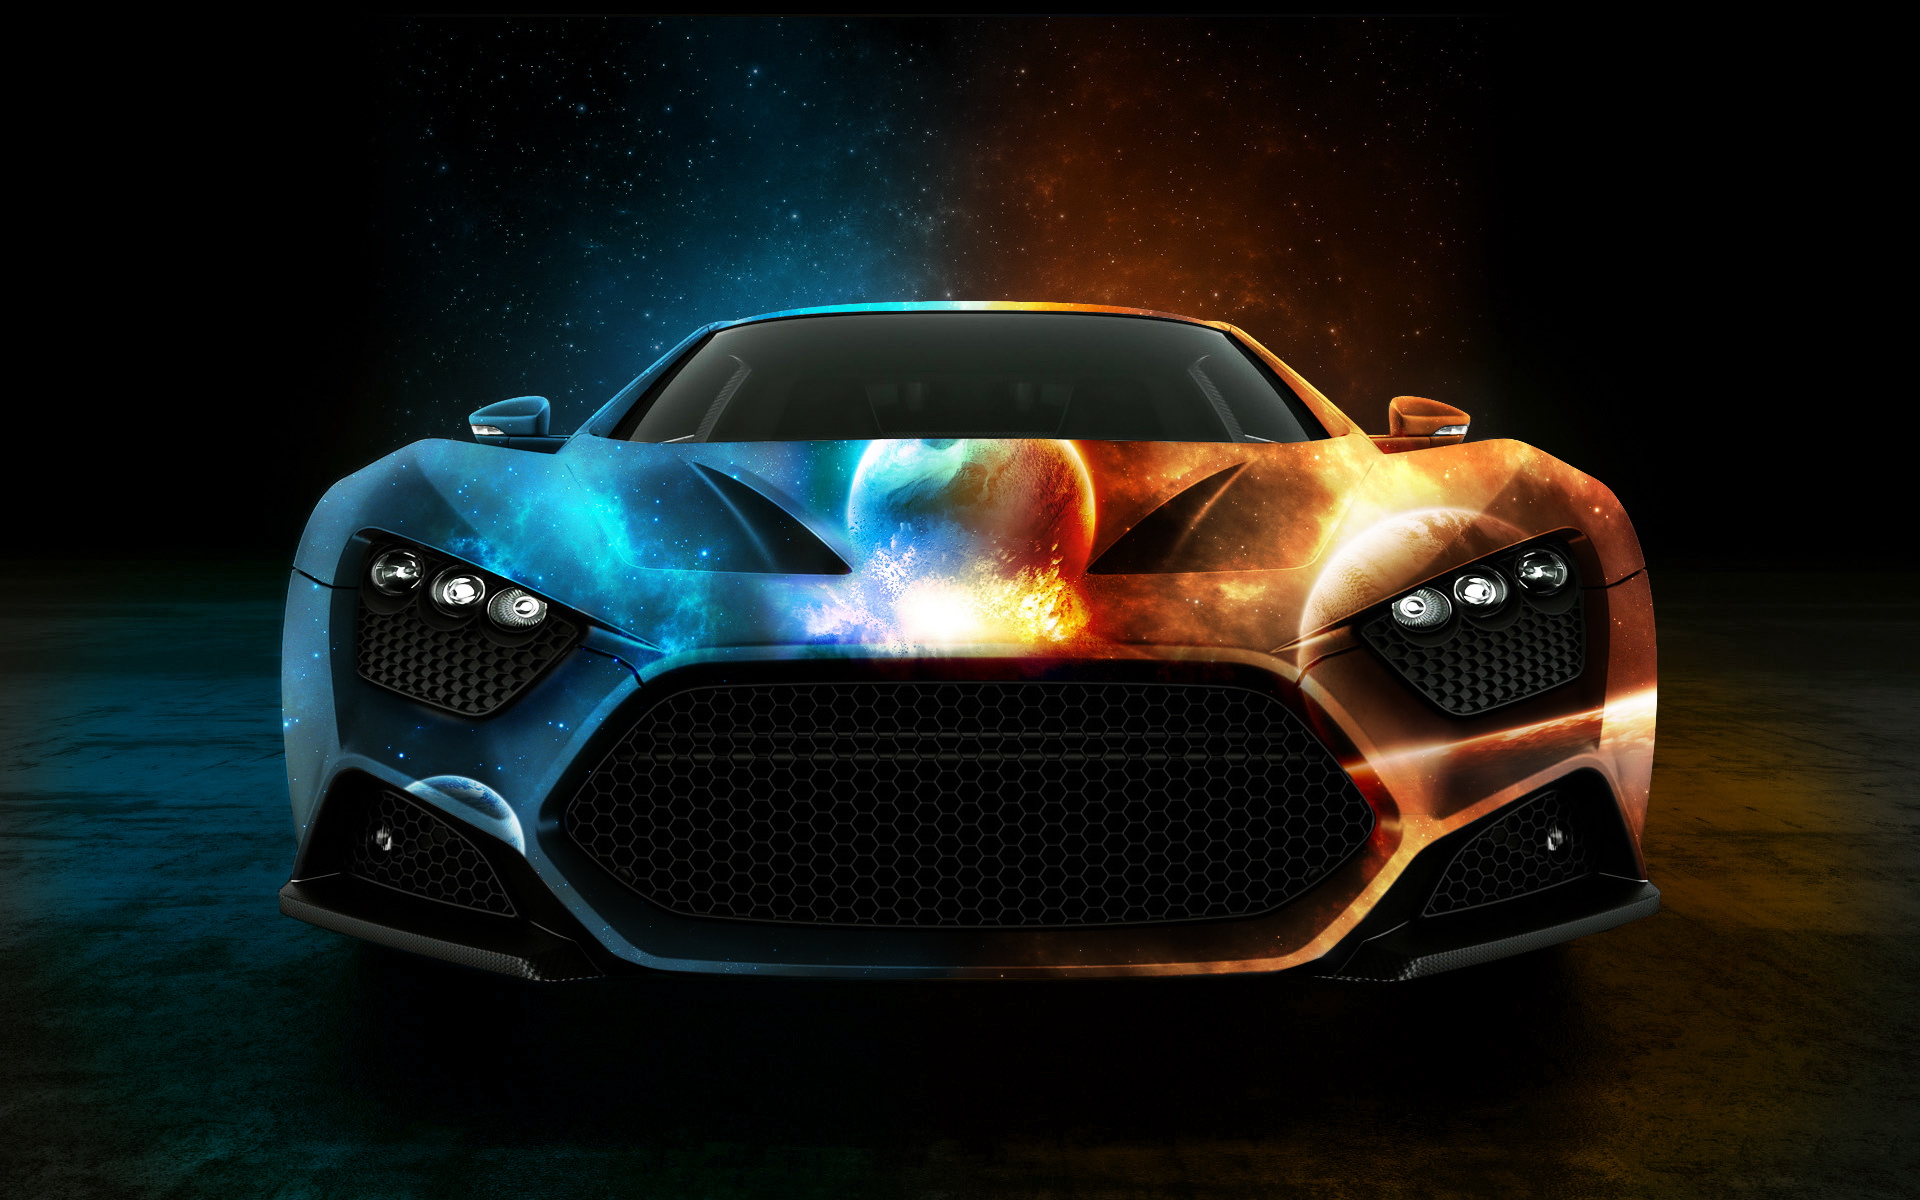 Water And Fire Car Wallpaper Ibackgroundwallpaper